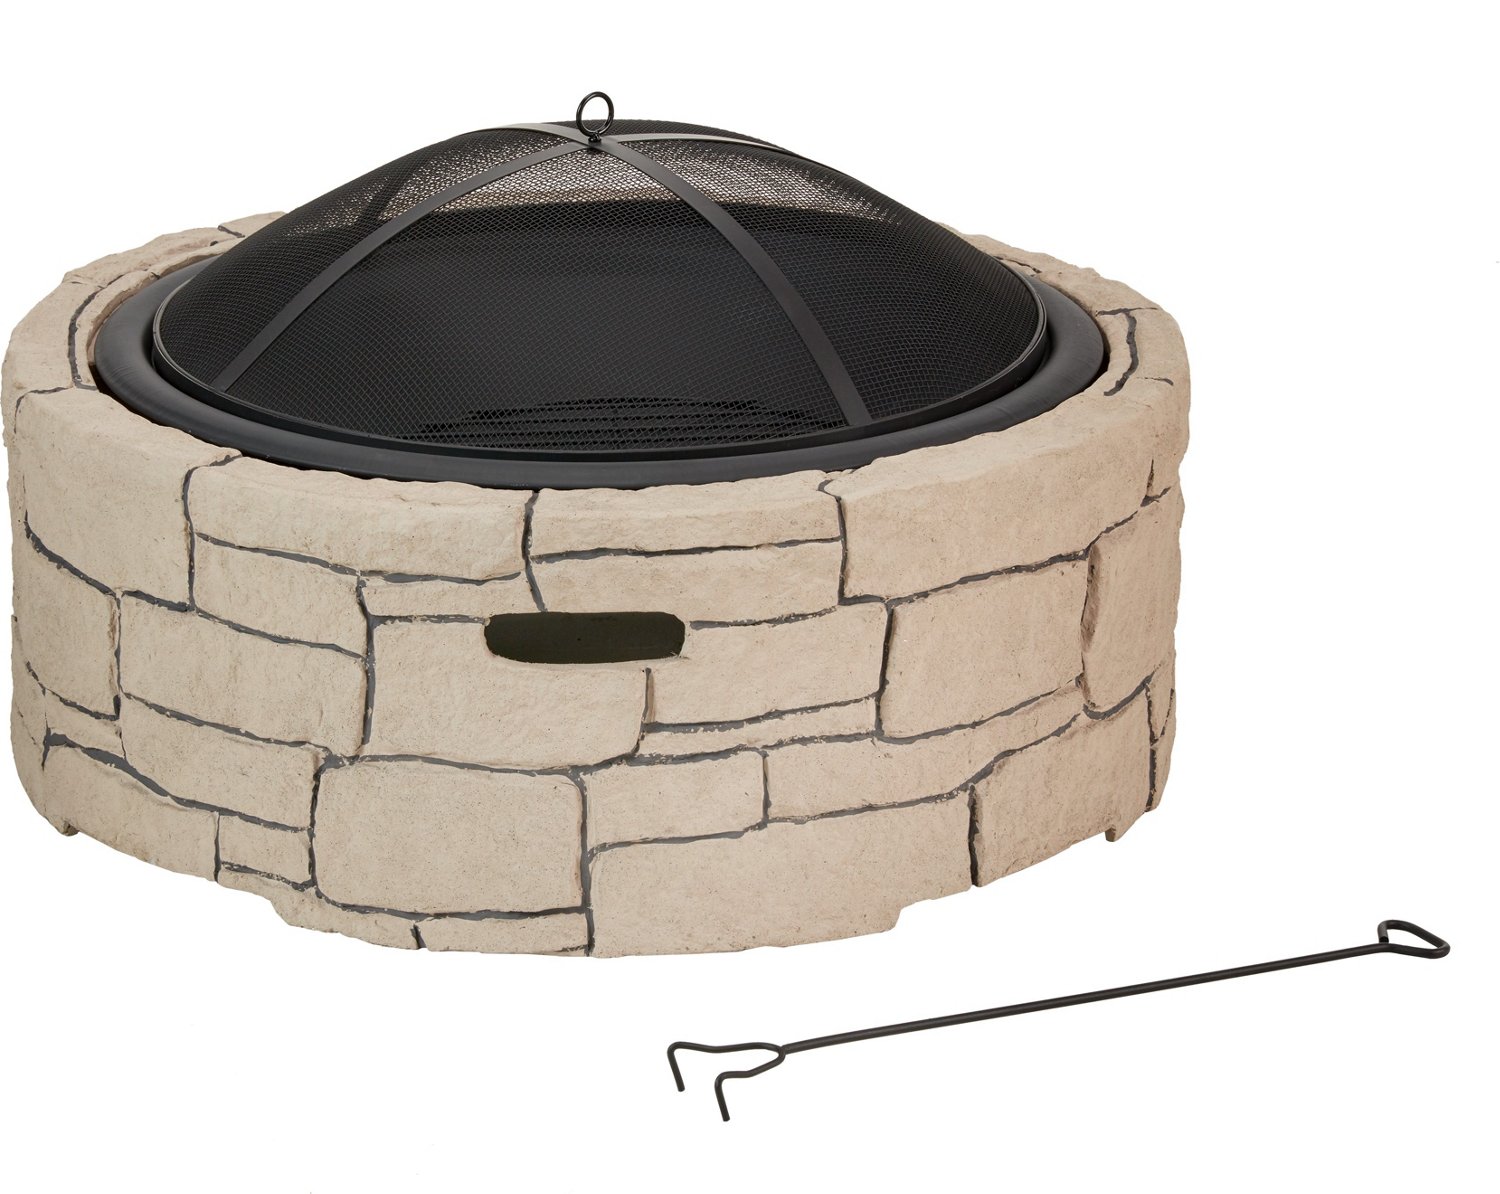 Mosaic 35 in Island Fire Pit | Academy